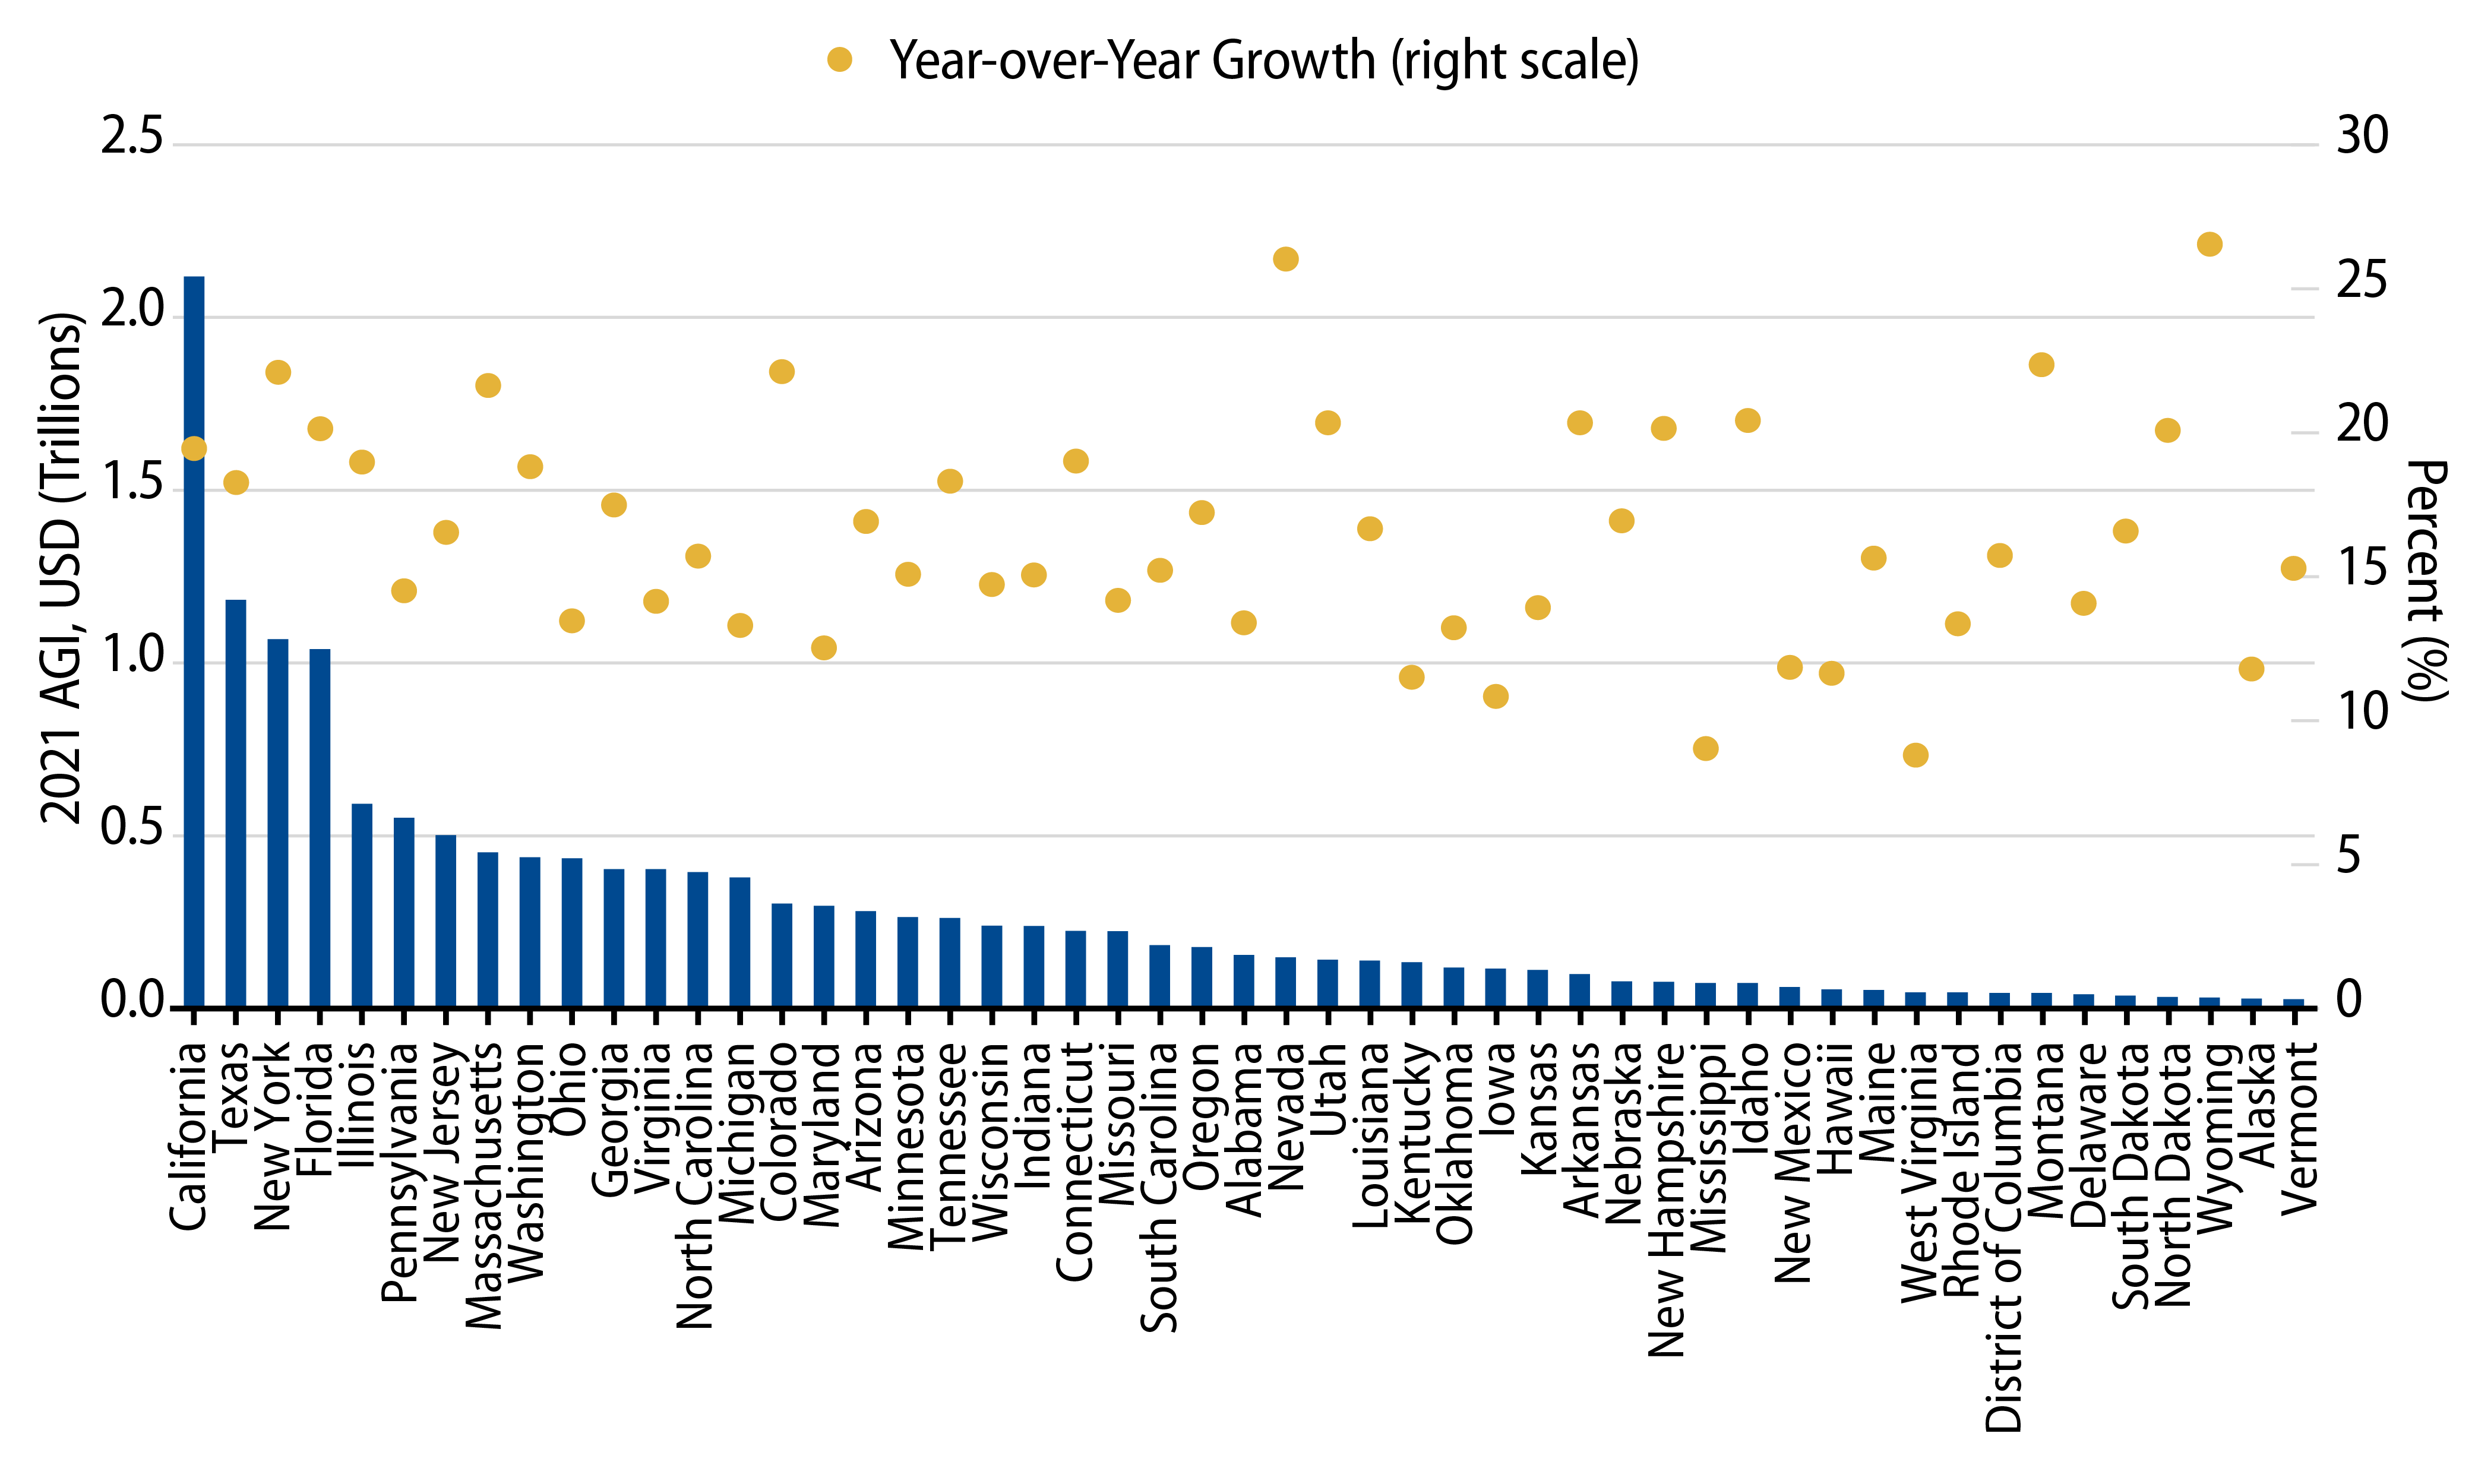 Explore US Adjusted Gross Income (AGI) and YoY Growth by State